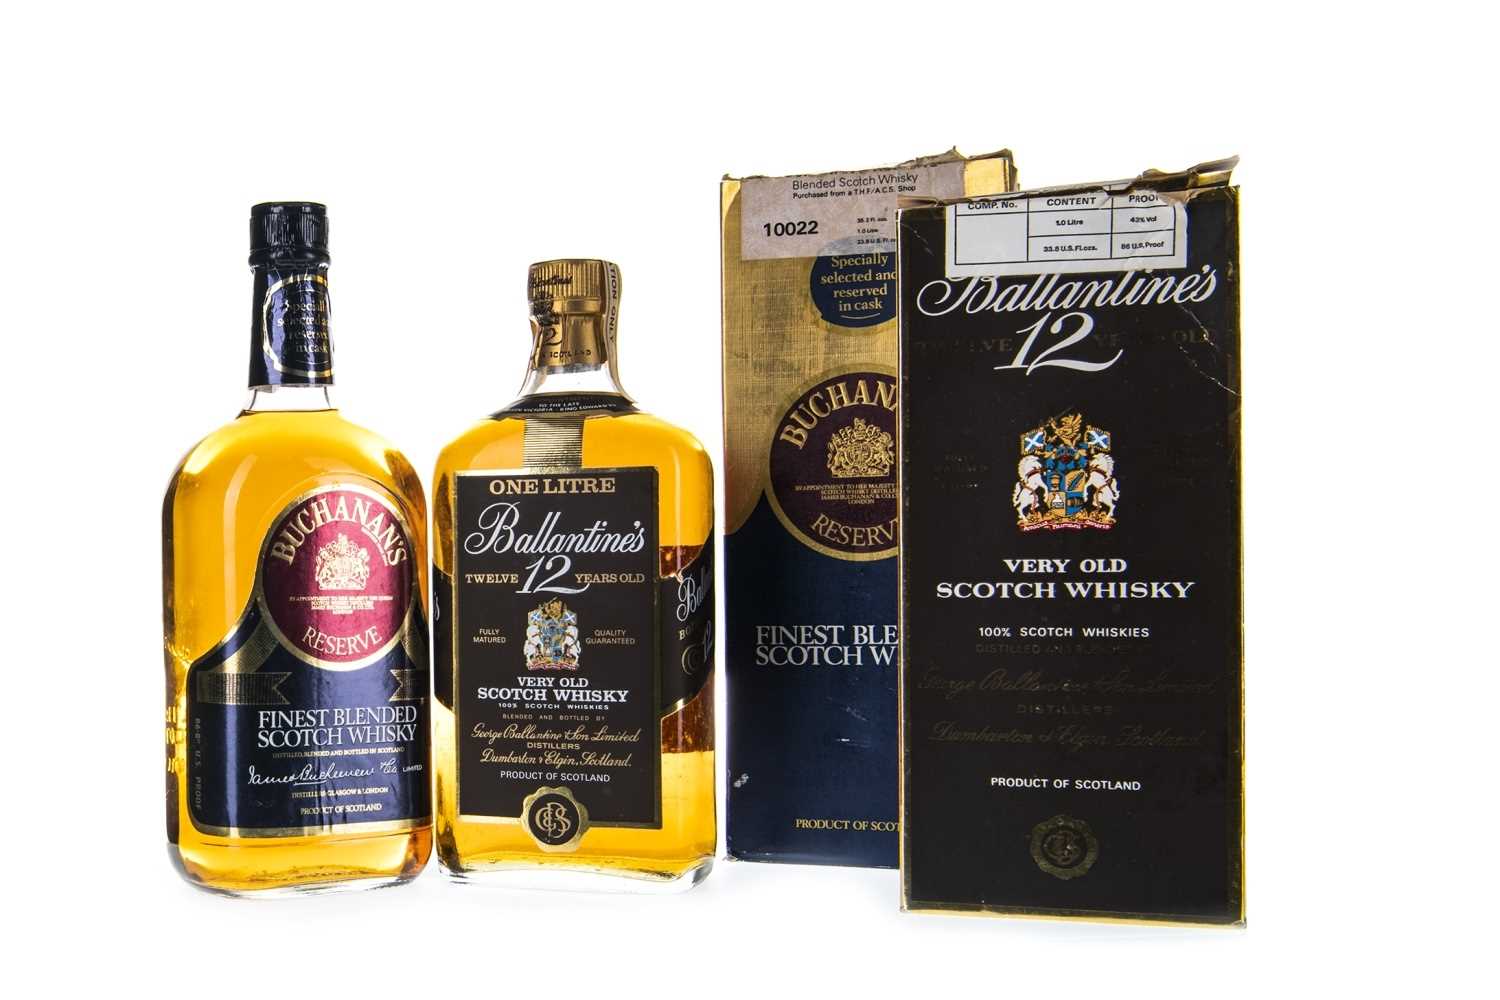 Lot 414 - ONE LITRE OF BALLANTINE'S 12 YEARS OLD AND ONE LITRE OF BUCHANAN'S RESERVE